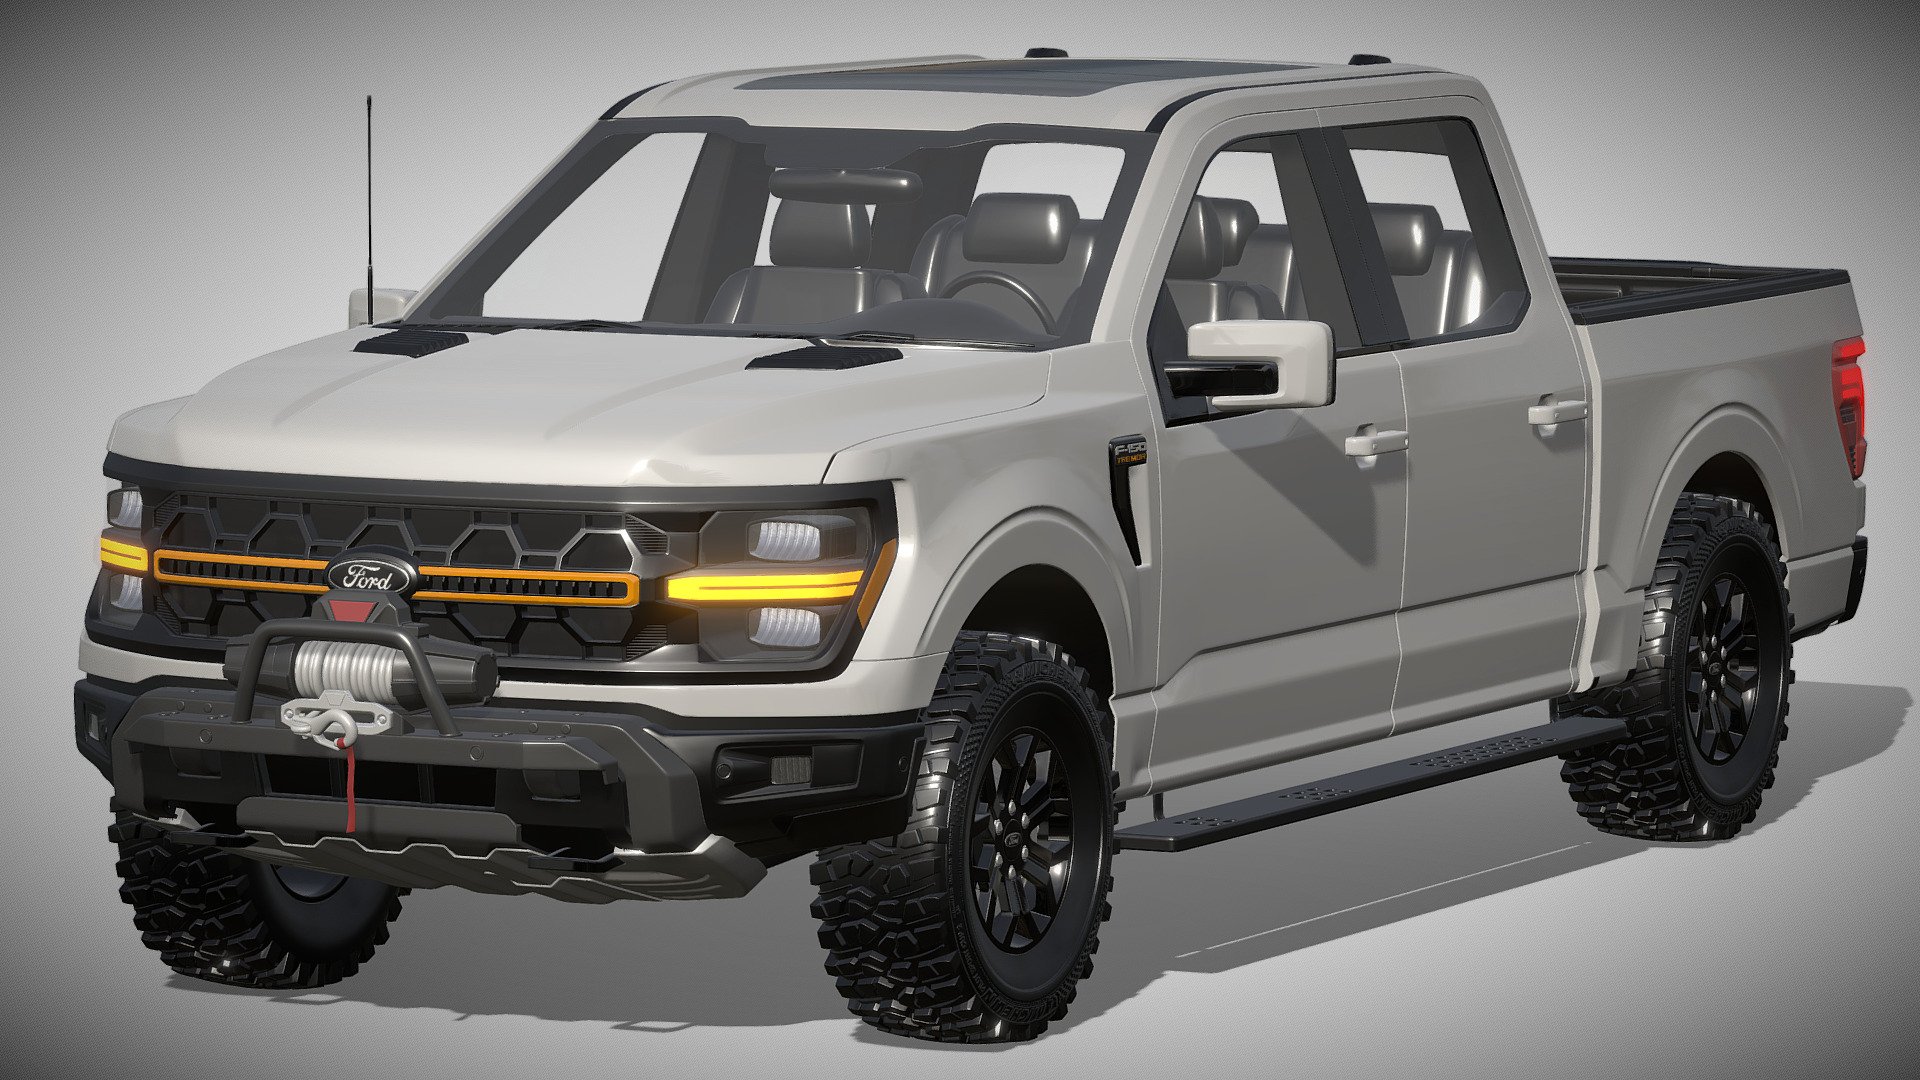 Ford F-150 Tremor 2024

https://www.ford.com/trucks/f150/2024/

Clean geometry Light weight model, yet completely detailed for HI-Res renders. Use for movies, Advertisements or games

Corona render and materials

All textures include in *.rar files

Lighting setup is not included in the file! - Ford F-150 Tremor 2024 - Buy Royalty Free 3D model by zifir3d 3d model